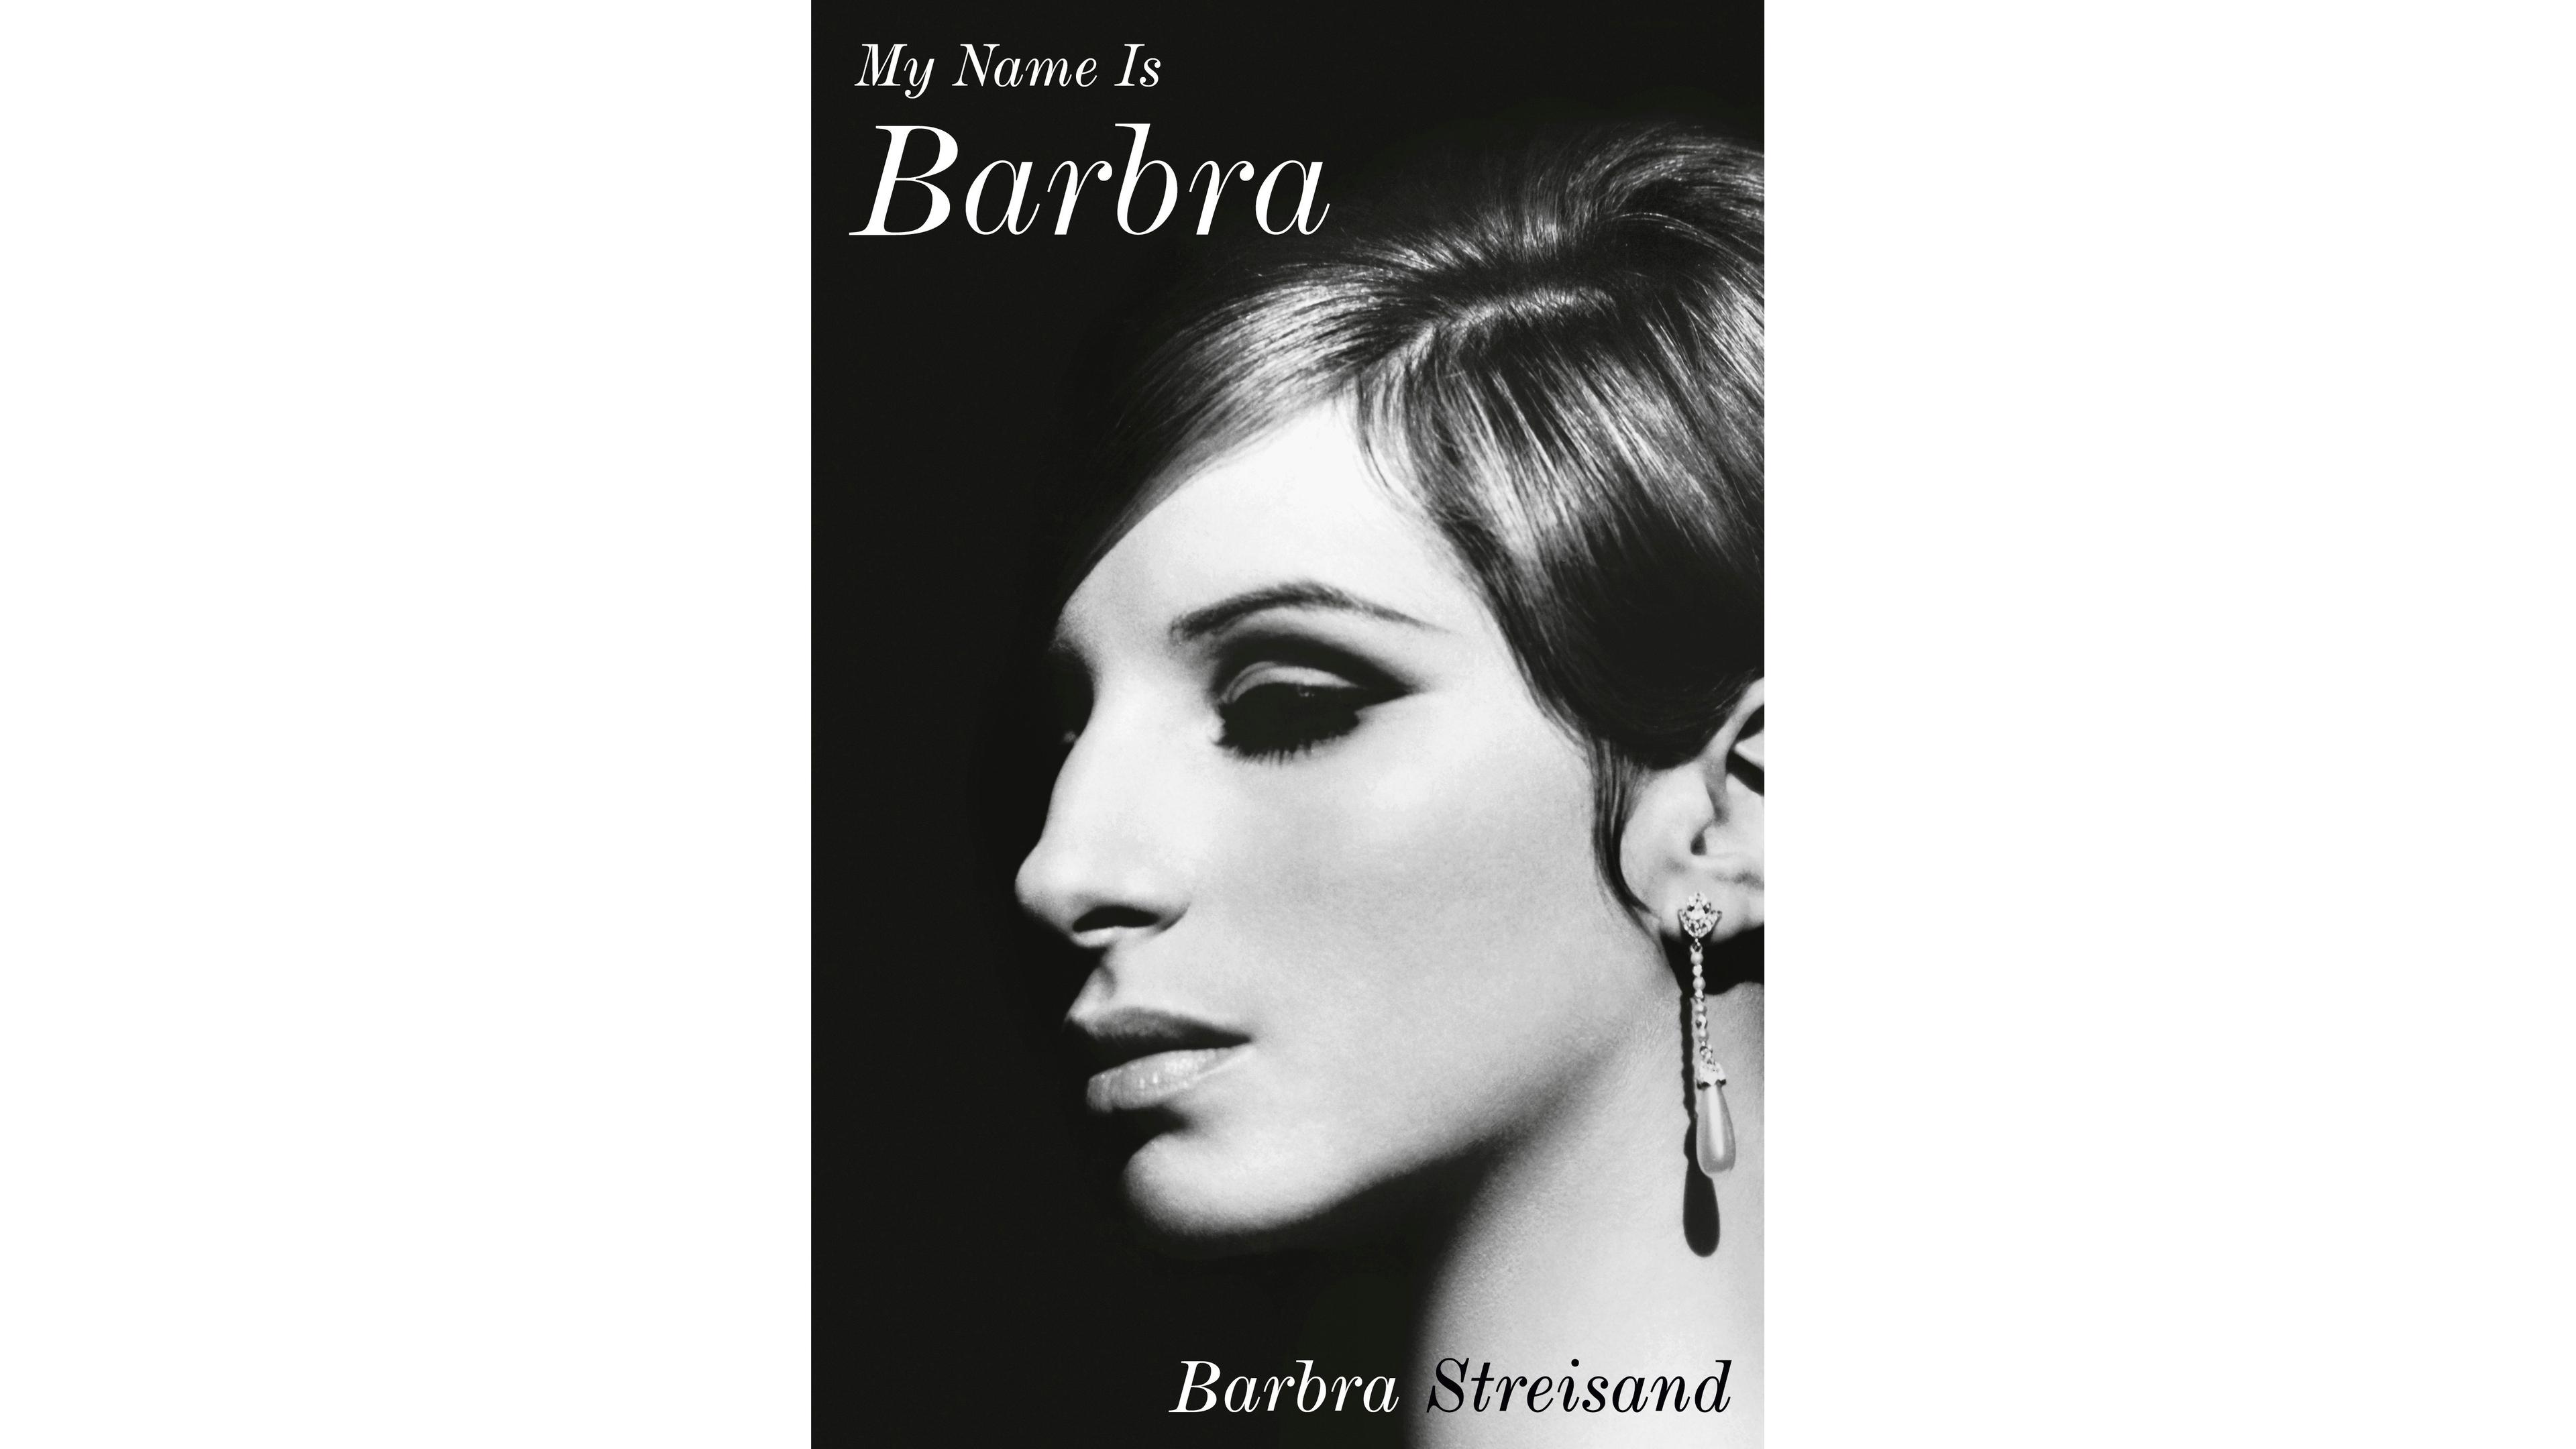 Cover des Buches "My Name is Barbra" 